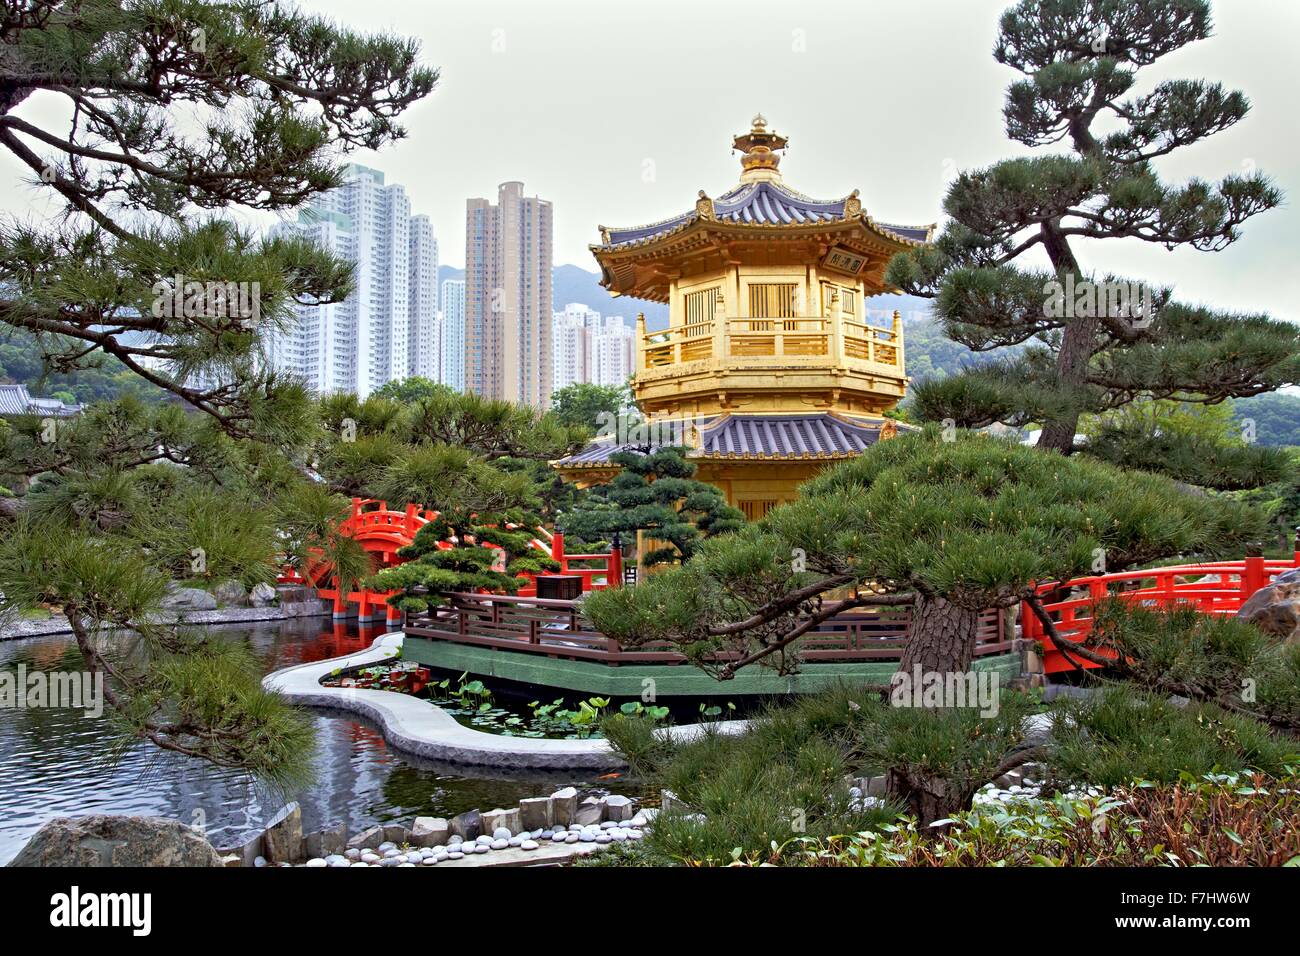 Golden Building Nan Lian Garden Hong Kong Tang Style Rules  The garden is built in the Tang Dynasty style (618 AD to 907 AD) Stock Photo